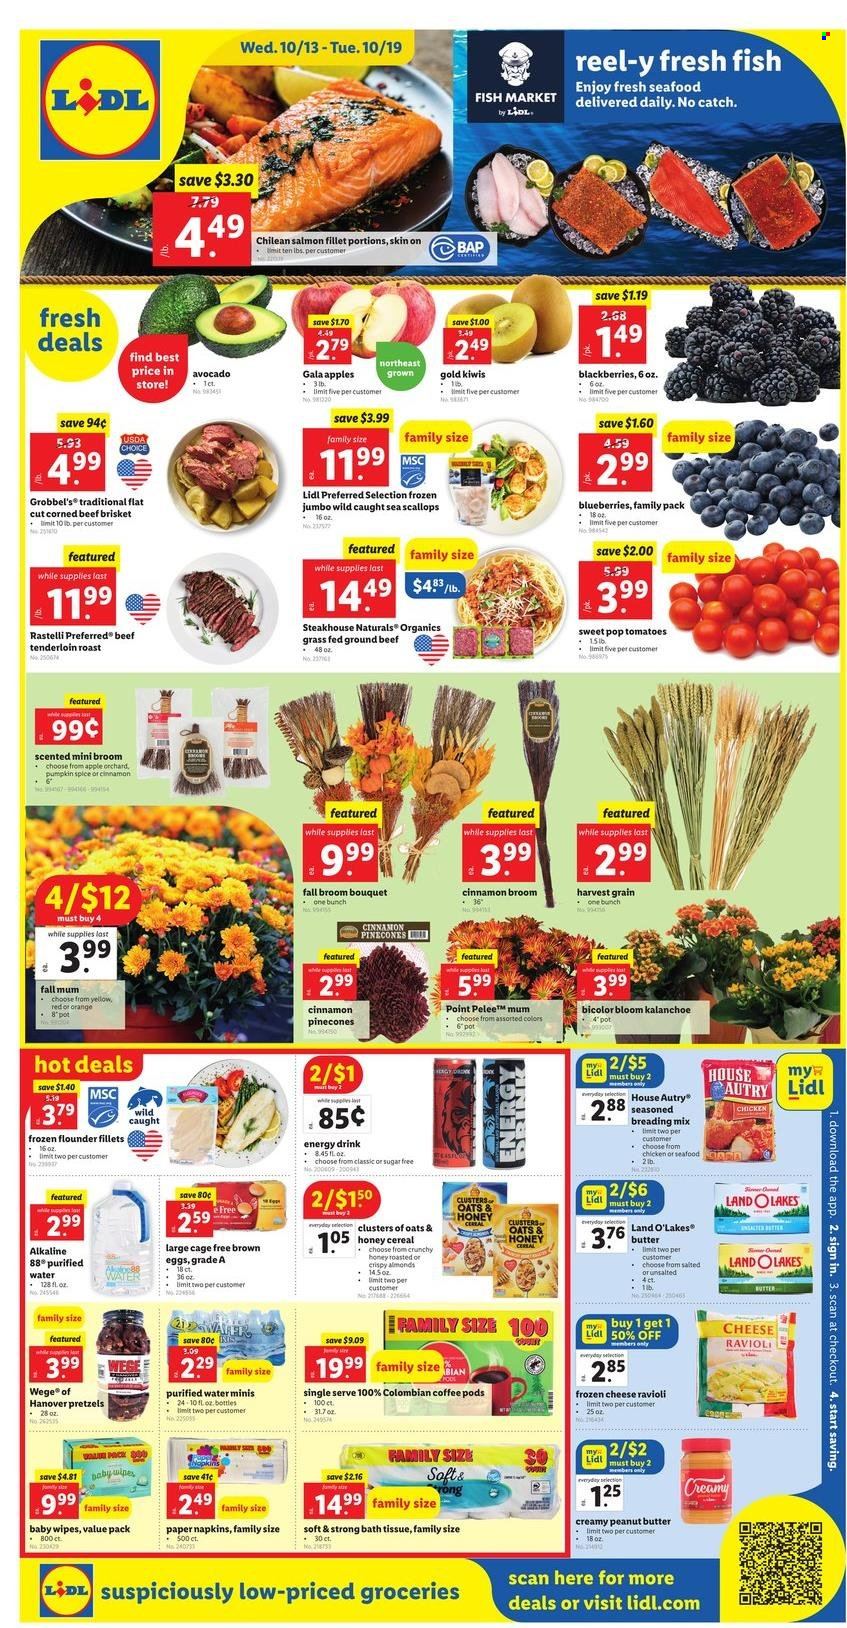 thumbnail - Lidl Flyer - 10/13/2021 - 10/19/2021 - Sales products - pretzels, tomatoes, pumpkin, apples, avocado, blackberries, blueberries, Gala, kiwi, oranges, flounder, salmon, salmon fillet, scallops, seafood, ravioli, corned beef, cheese, eggs, cage free eggs, cereals, cinnamon, honey, peanut butter, almonds, energy drink, purified water, coffee pods, beef meat, ground beef, beef brisket, wipes, baby wipes, napkins, bath tissue, Mum, broom, pot, paper, reel, bouquet. Page 1.